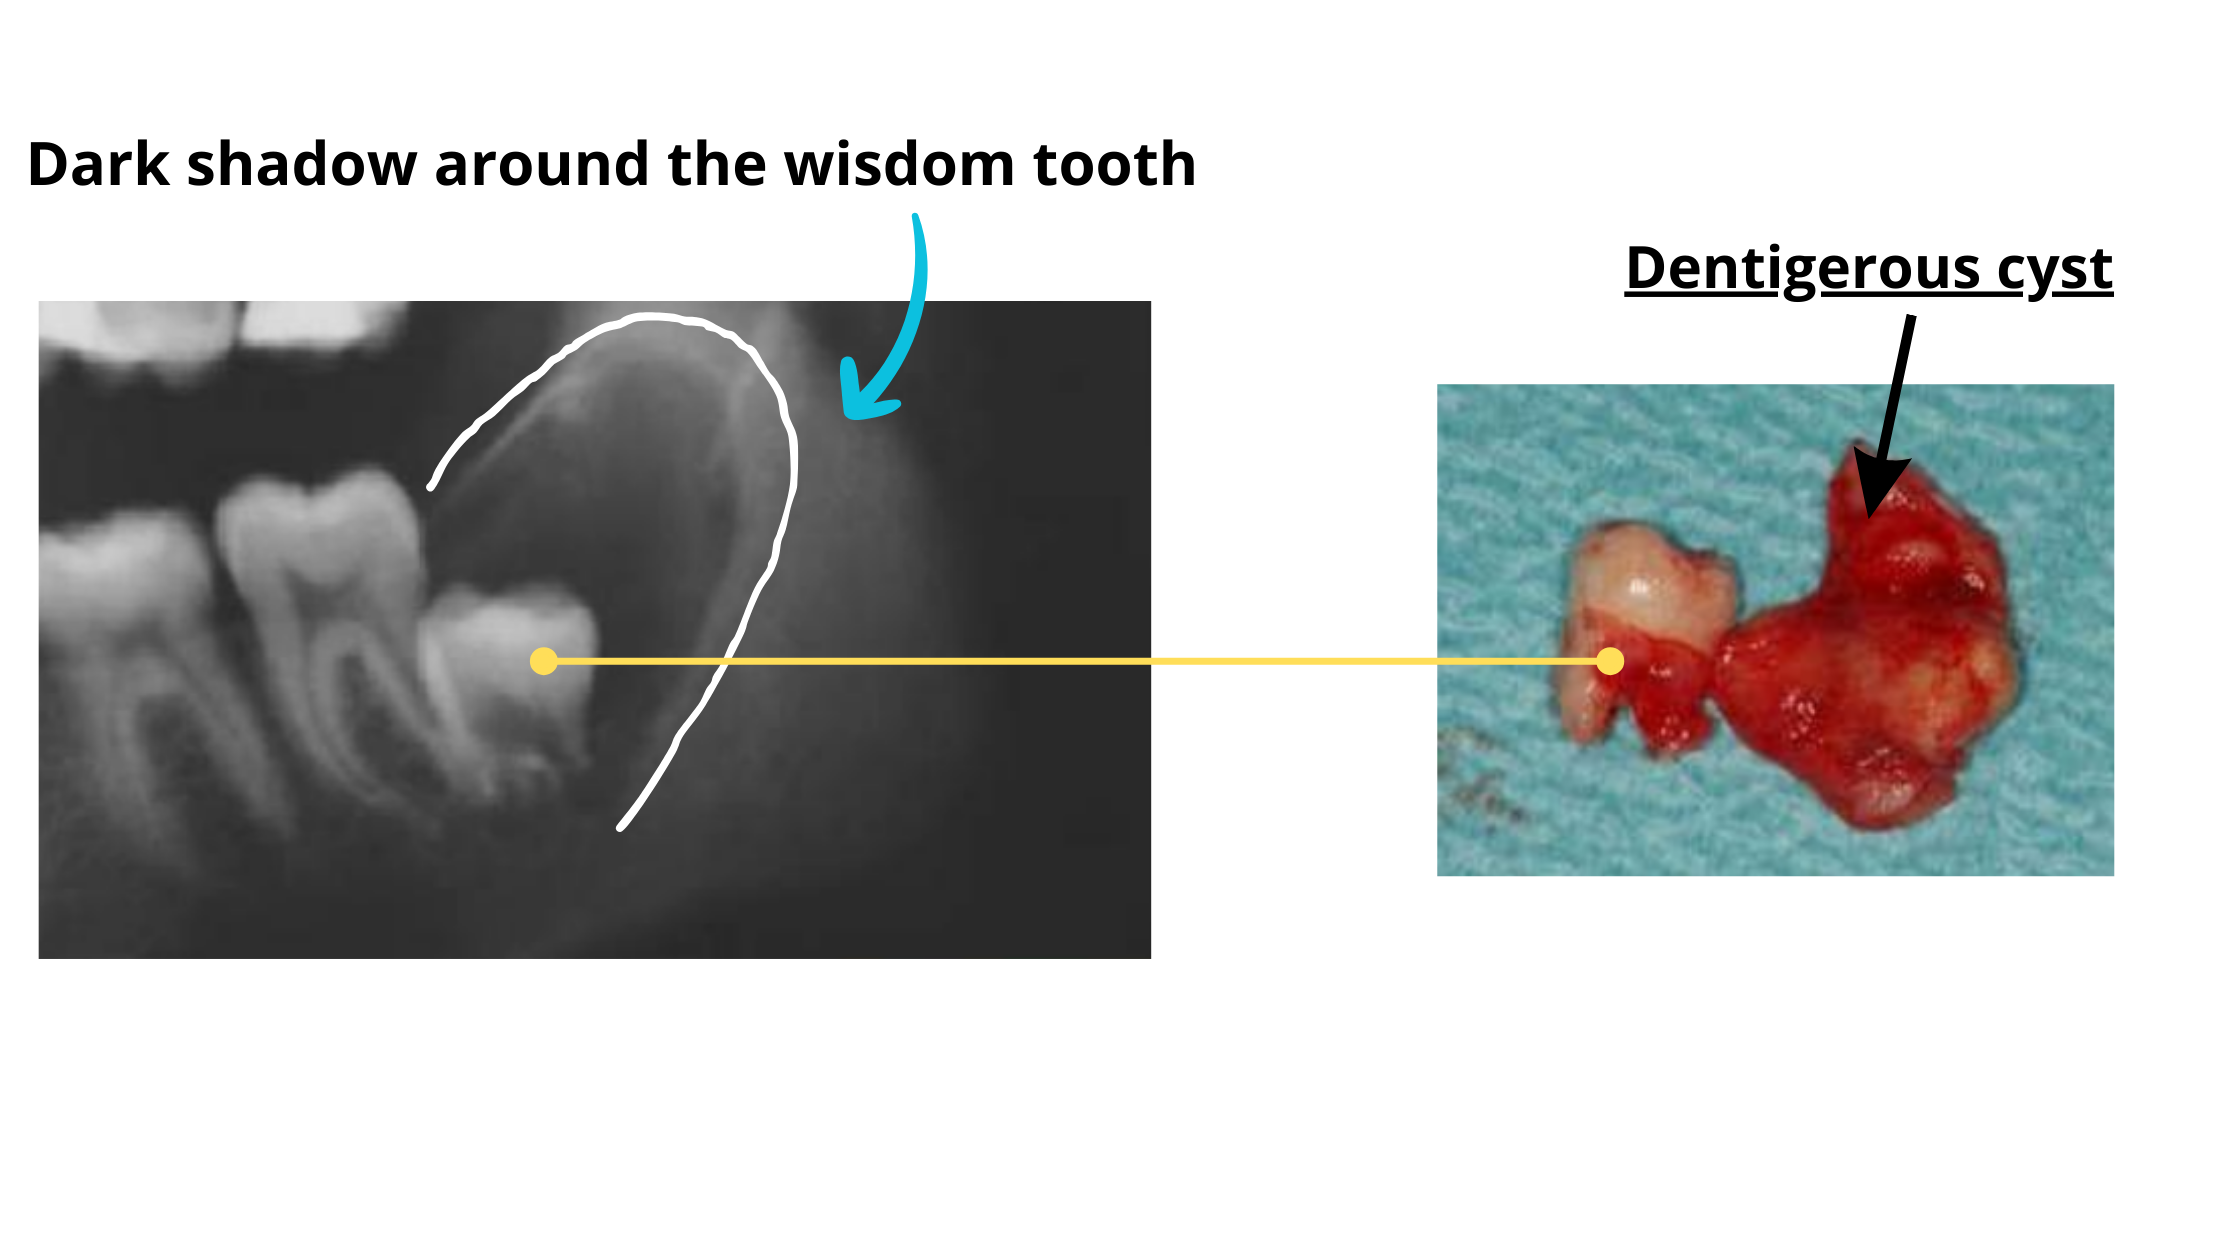 Dental X-ray and image of a removed wisdom tooth showing a dentigerous cyst